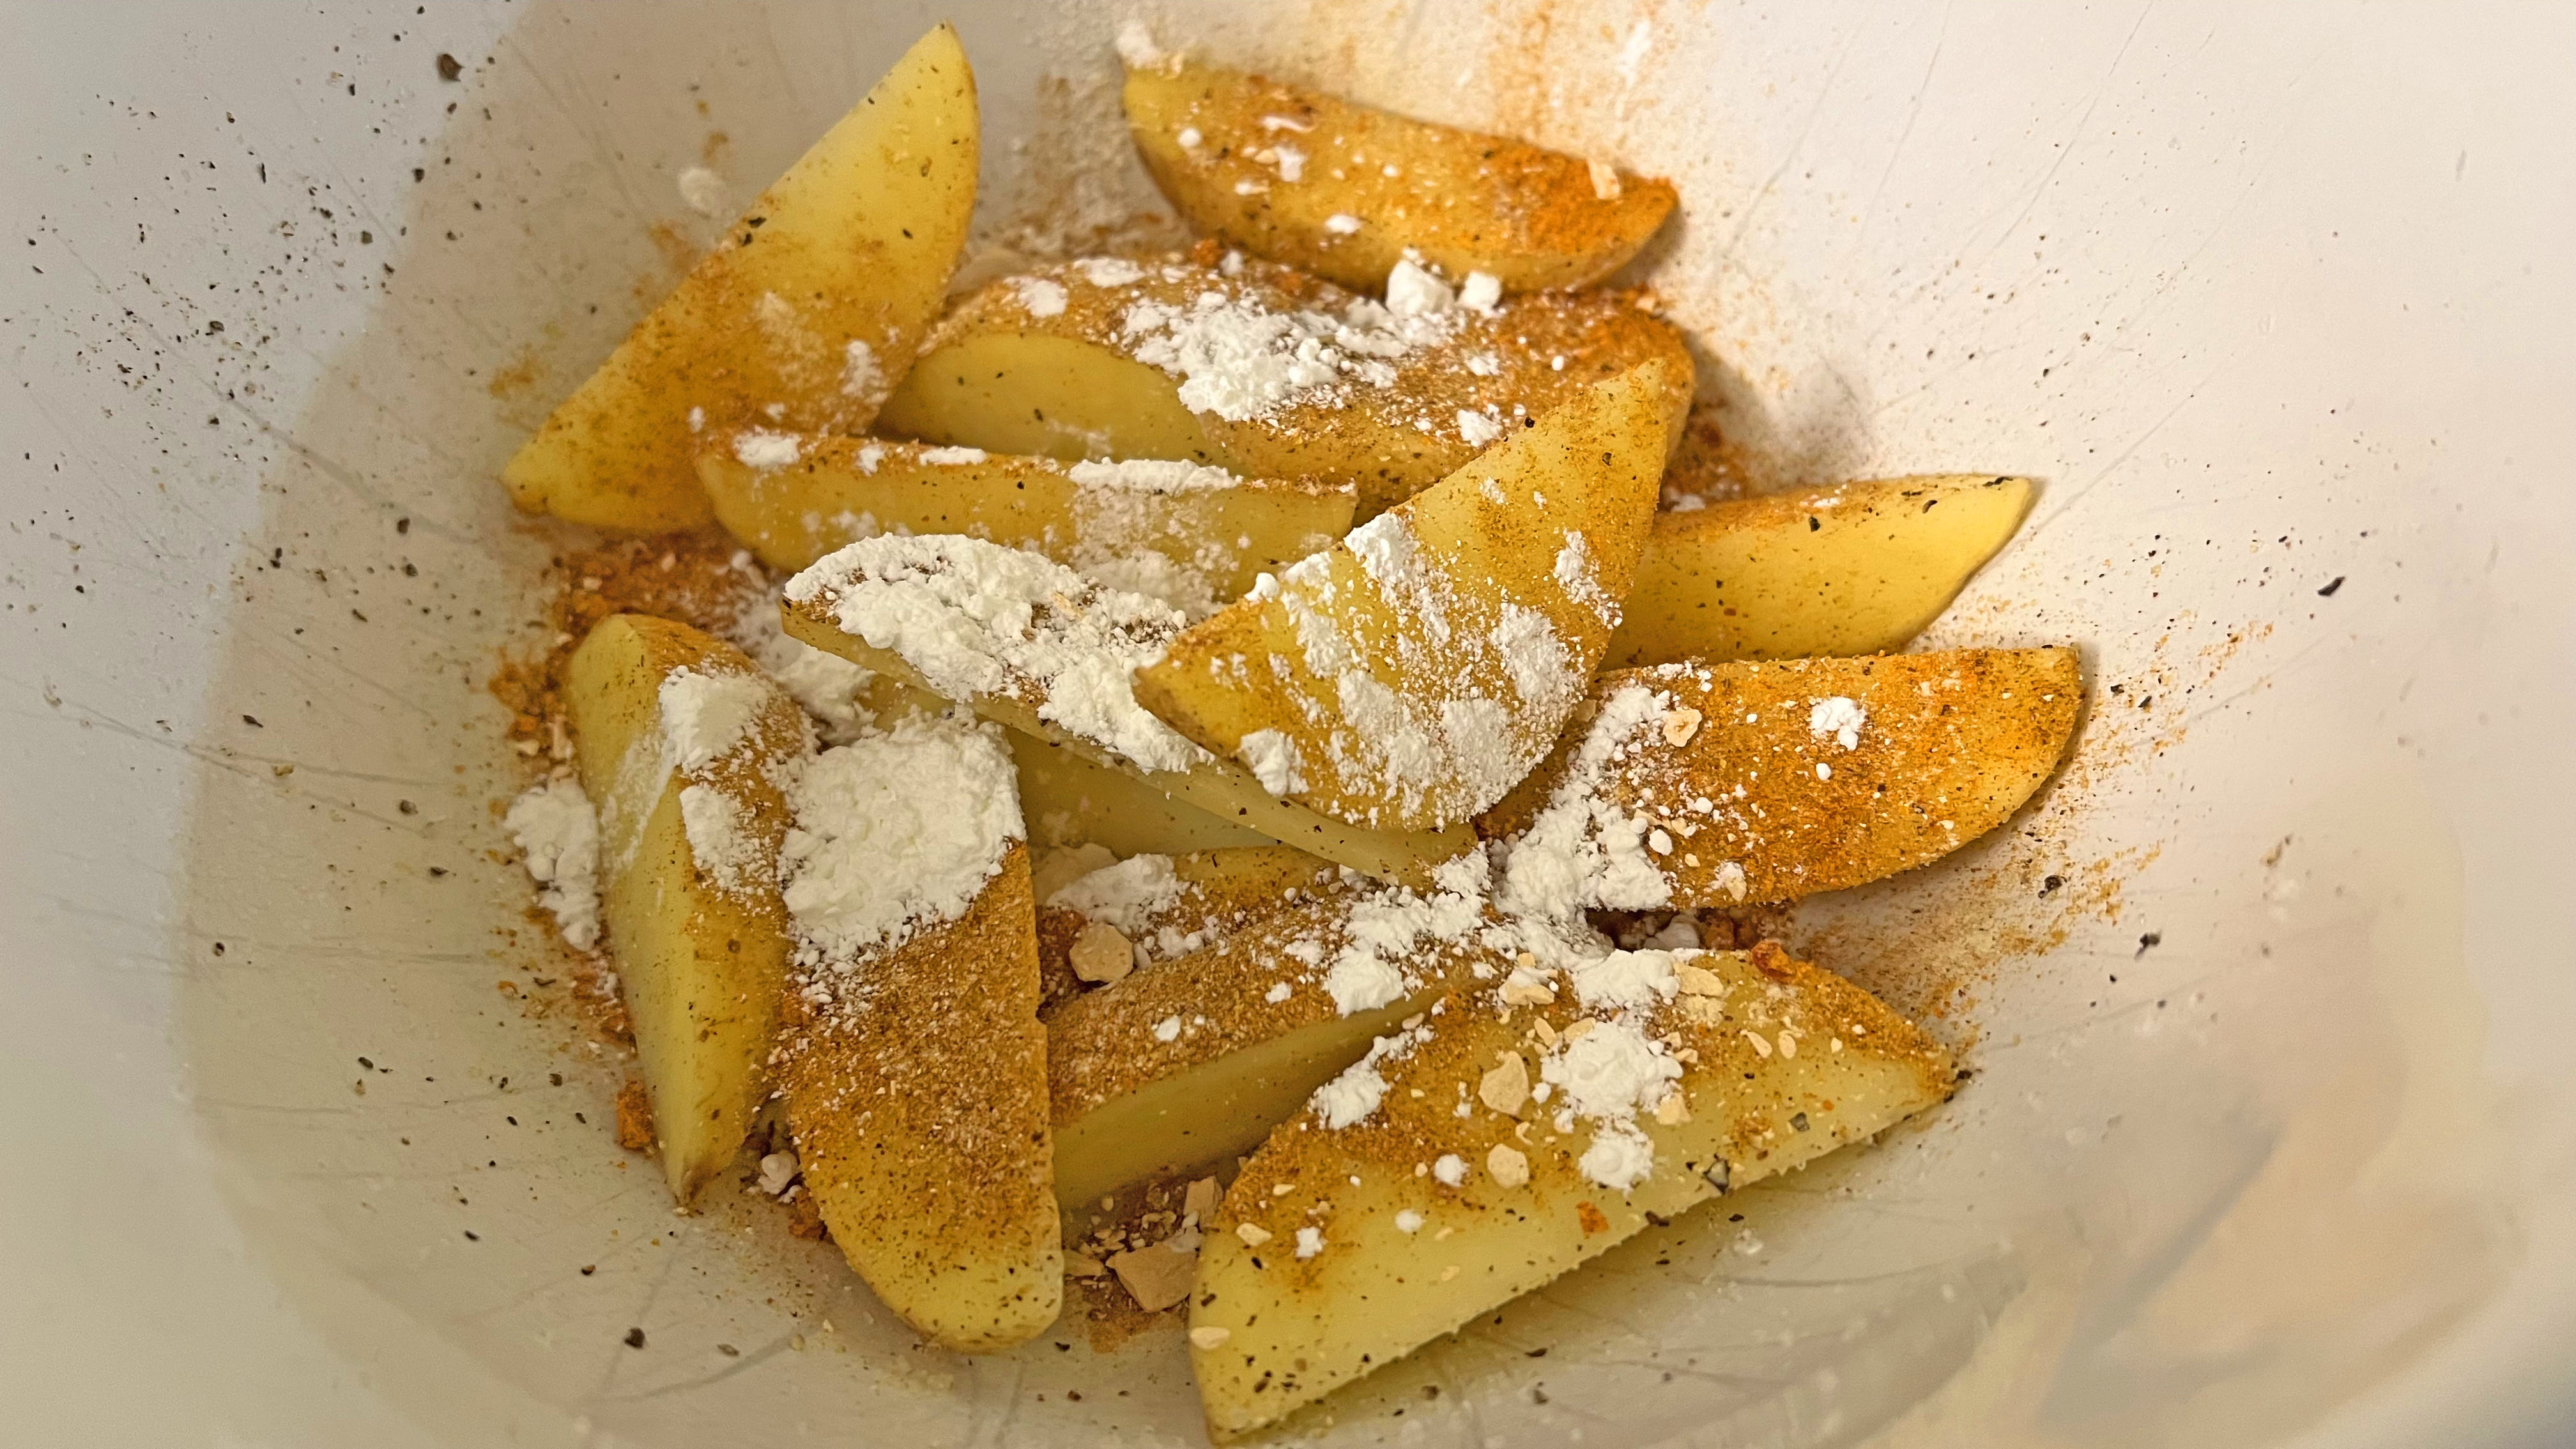 In a bowl, season potato wedges with cornstarch, salt, pepper and paprika